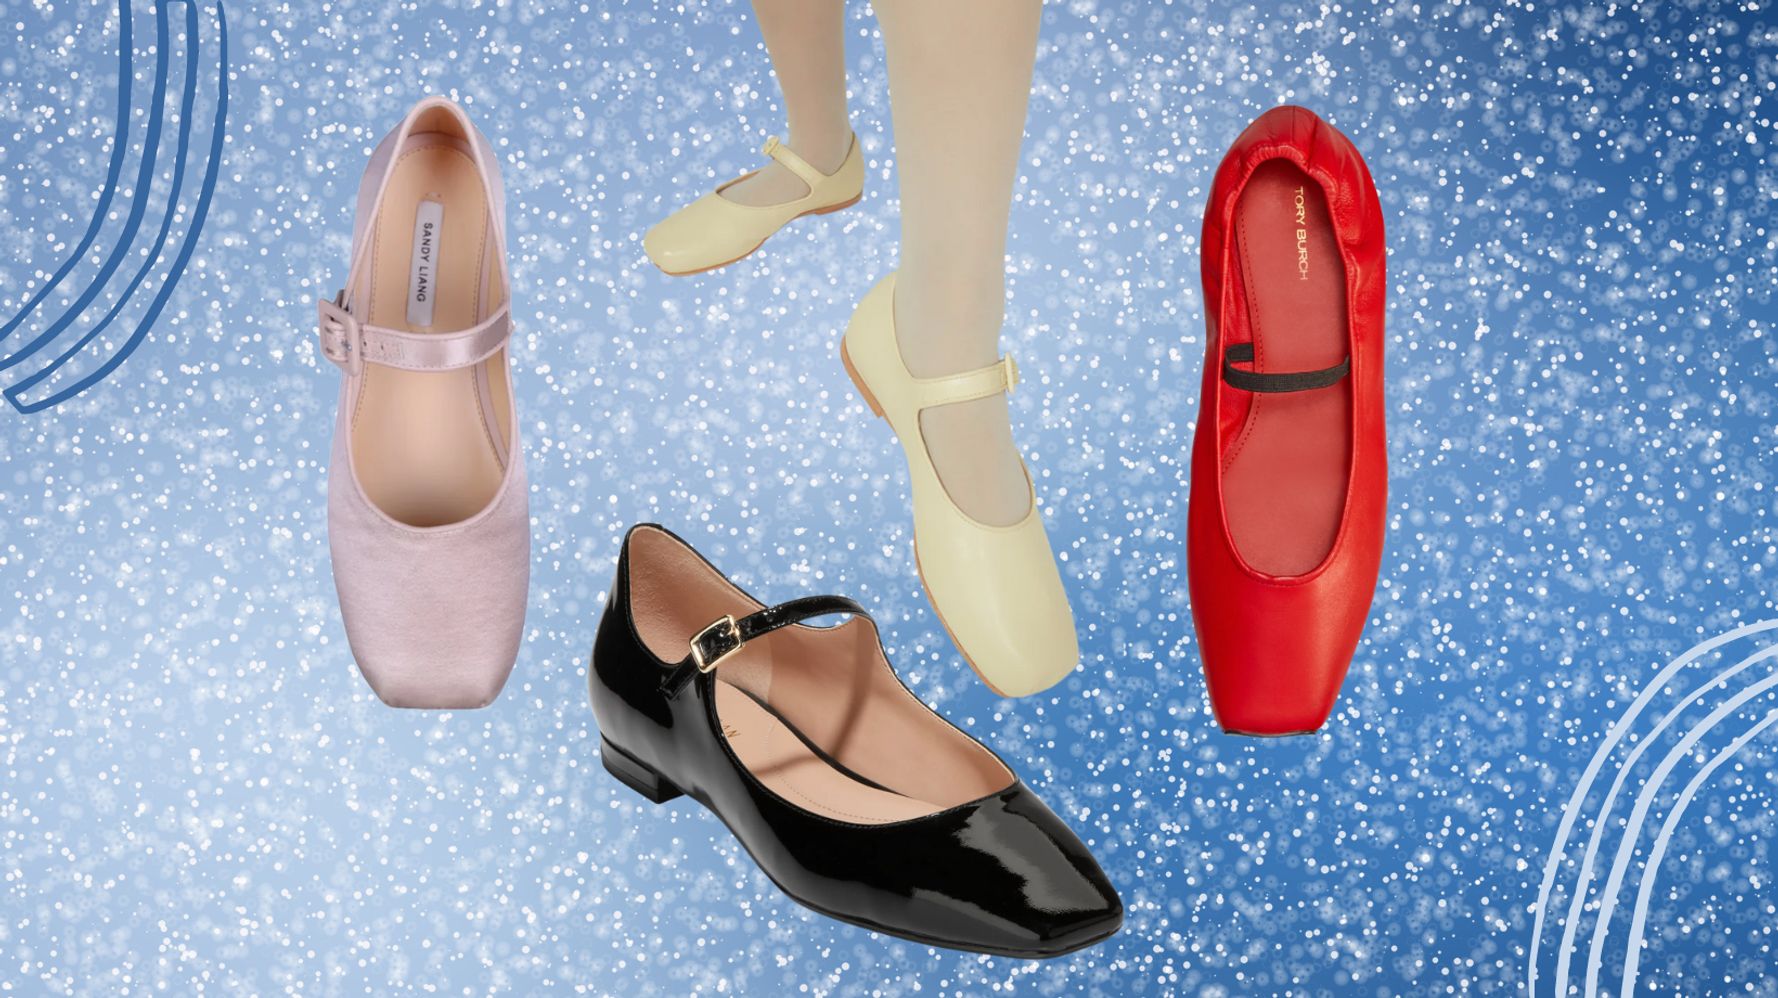 The Top Spring Shoe Trends: Mary Janes, Sneakers, Ballet Flats